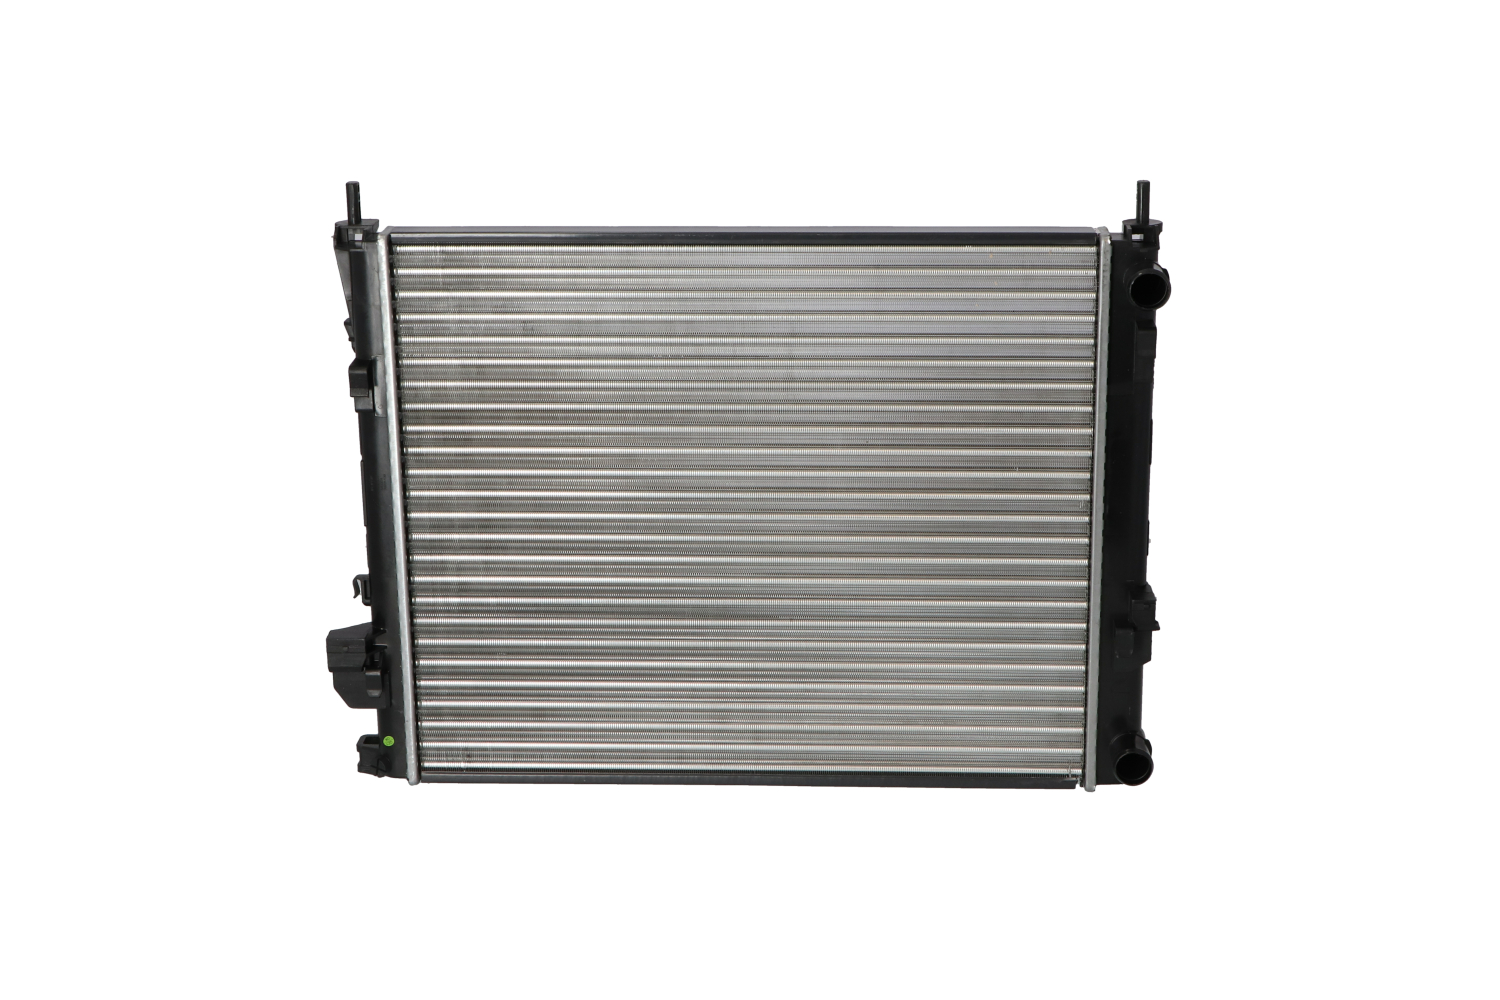 NRF Aluminium, 562 x 470 x 23 mm, Mechanically jointed cooling fins Radiator 58332A buy